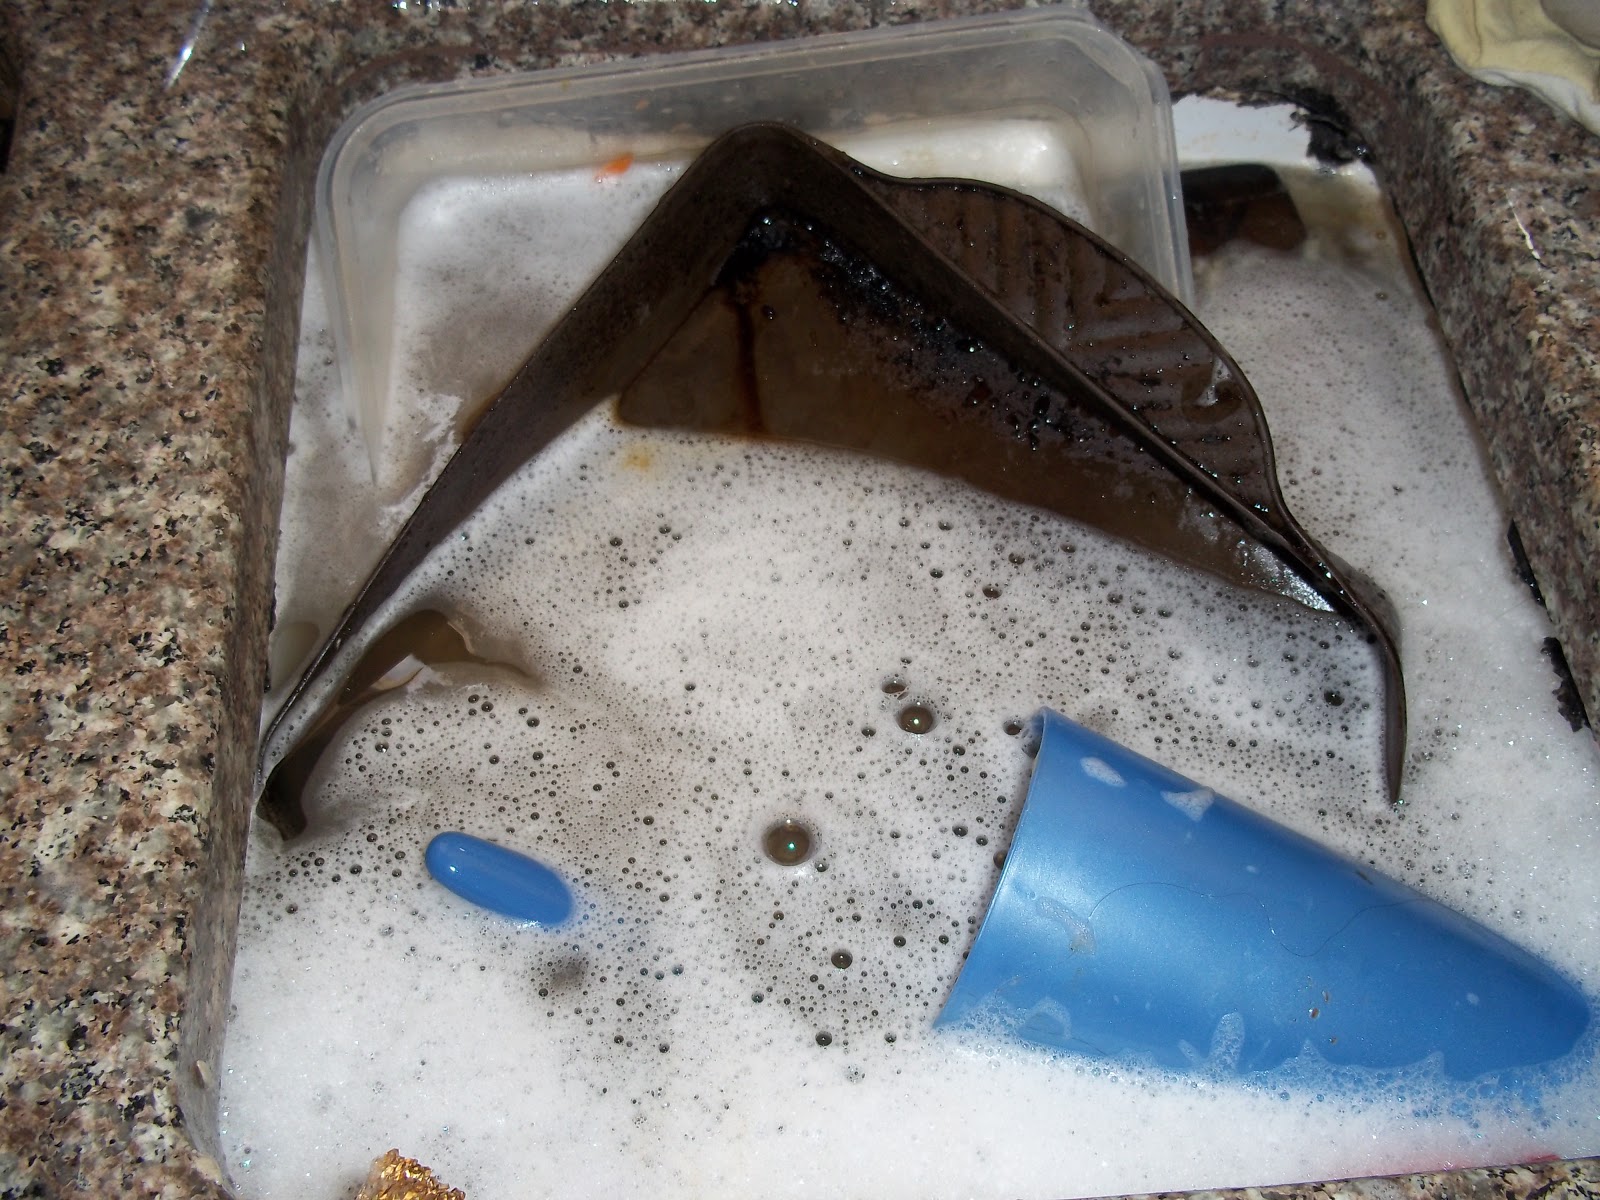 How To Unclog A Sink Drain, Diy Plumbing, And Why To Never Use Caustic Soda For Clogged Pipes | Penniless Parenting